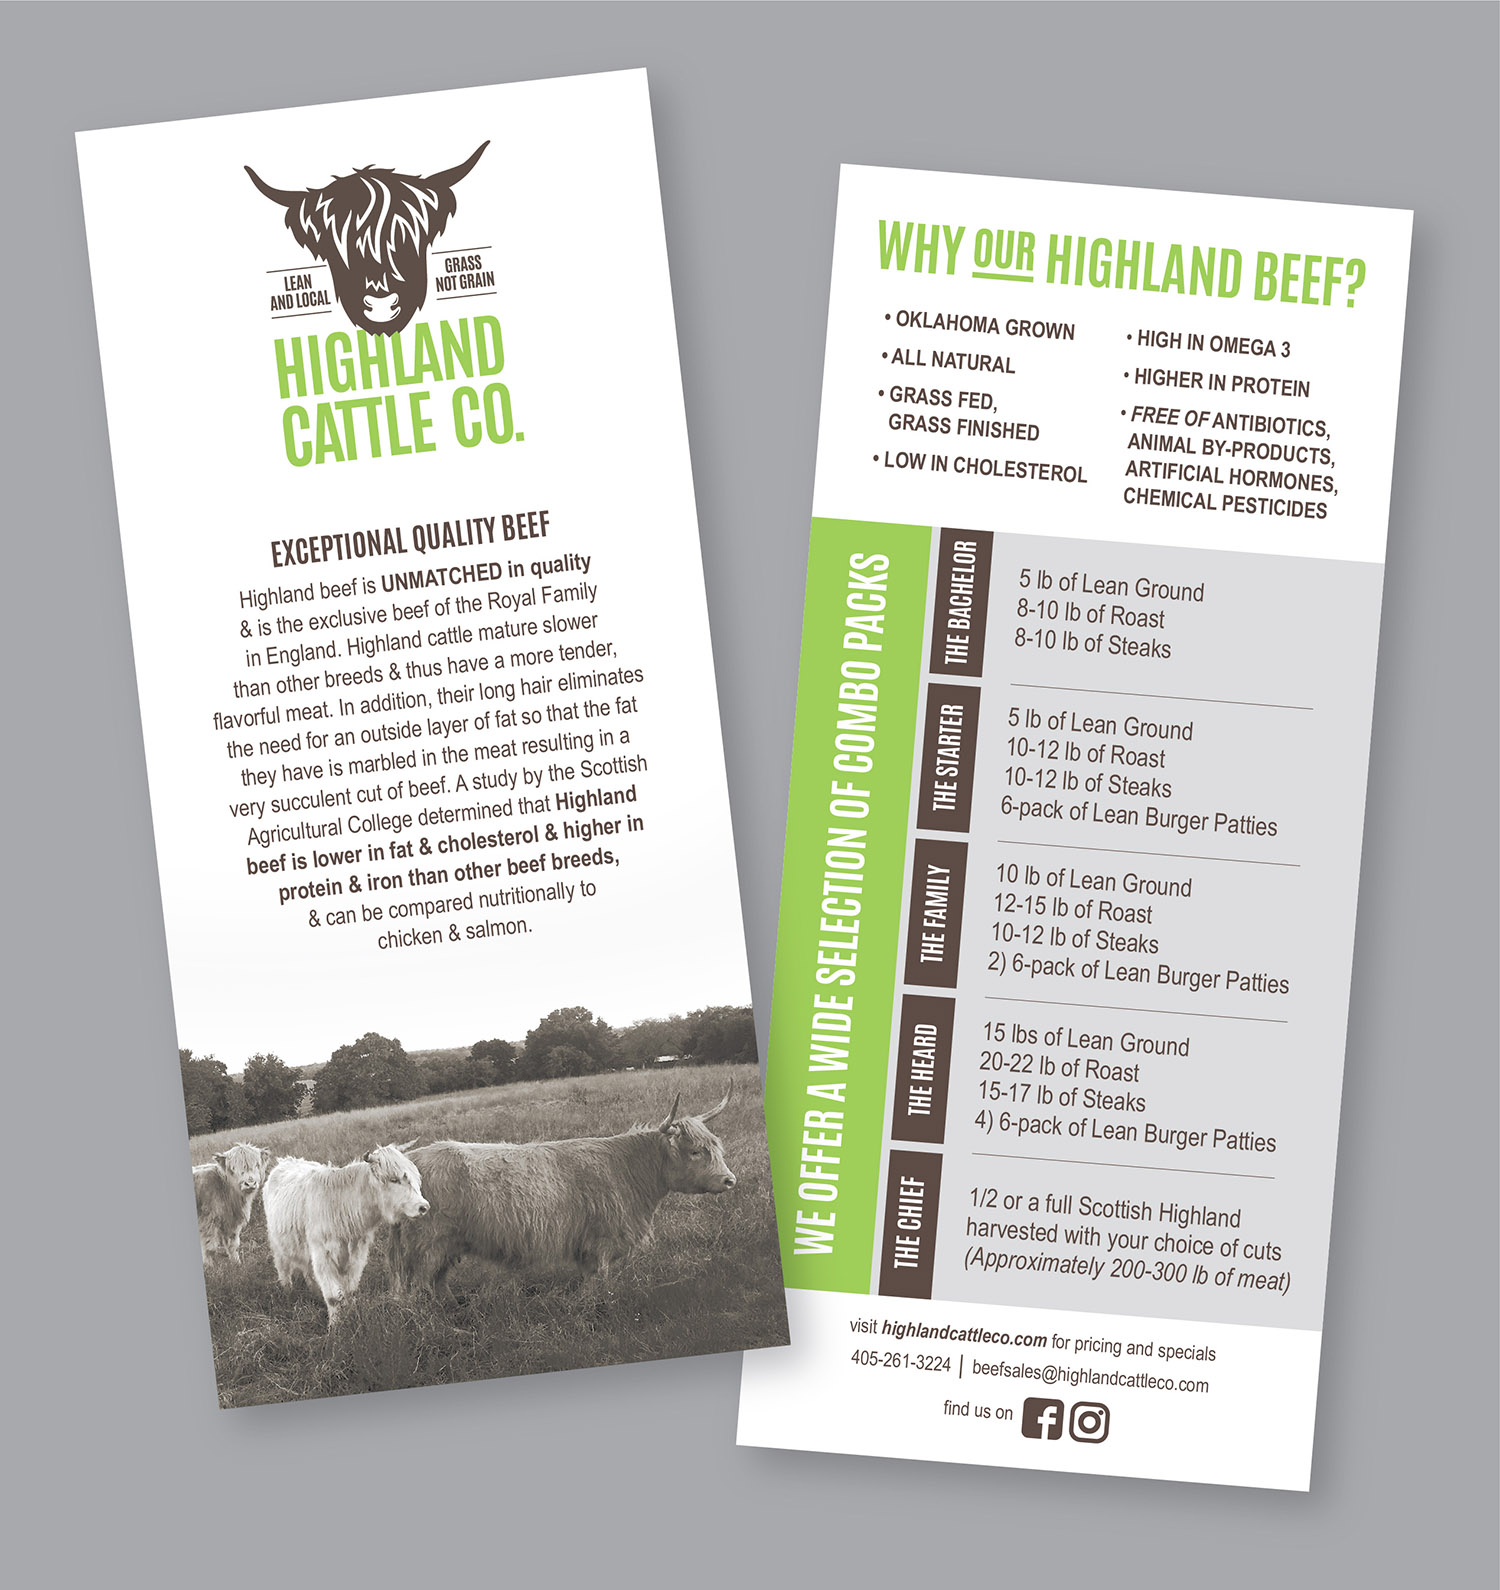 Promotional Flyer for Highland Cattle Co.